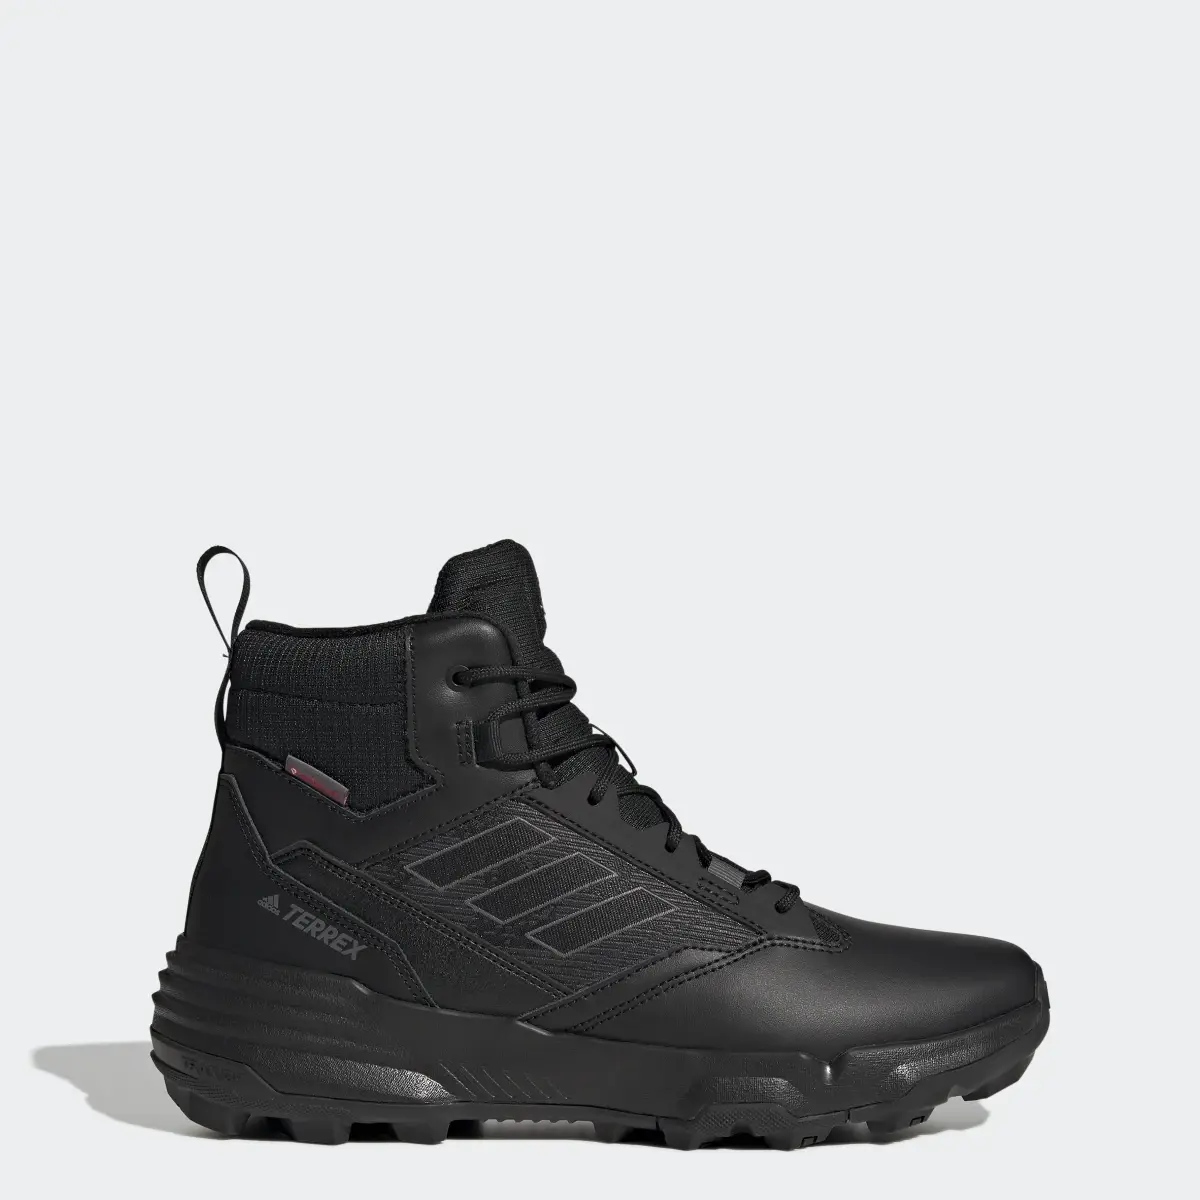 Adidas Unity Leather Mid COLD.RDY Hiking Boots. 1